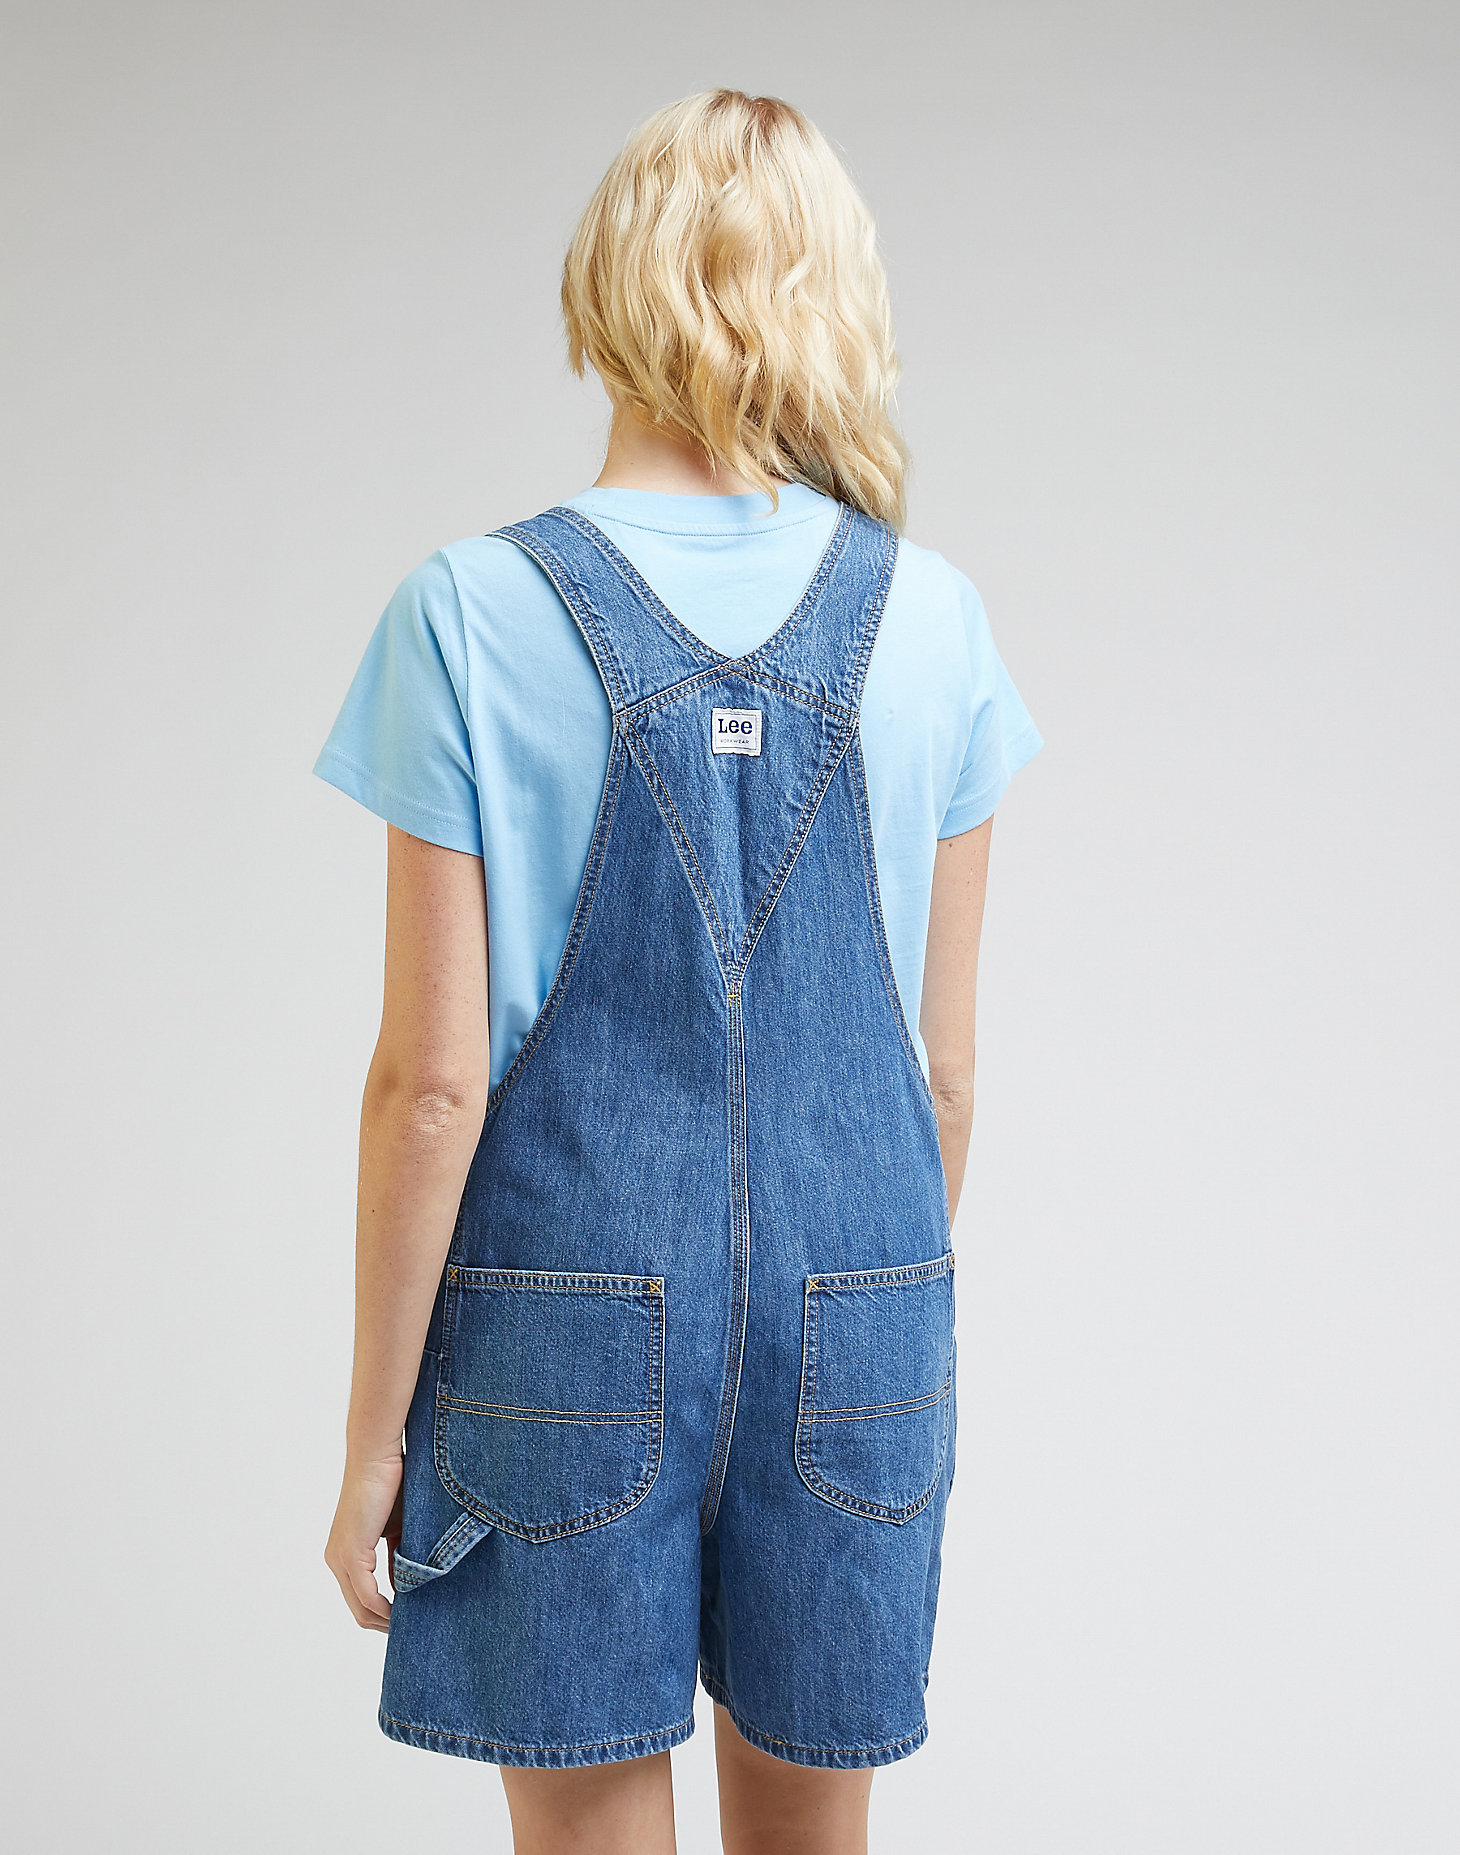 Short Bib Overall in Real Deal Dx alternative view 1